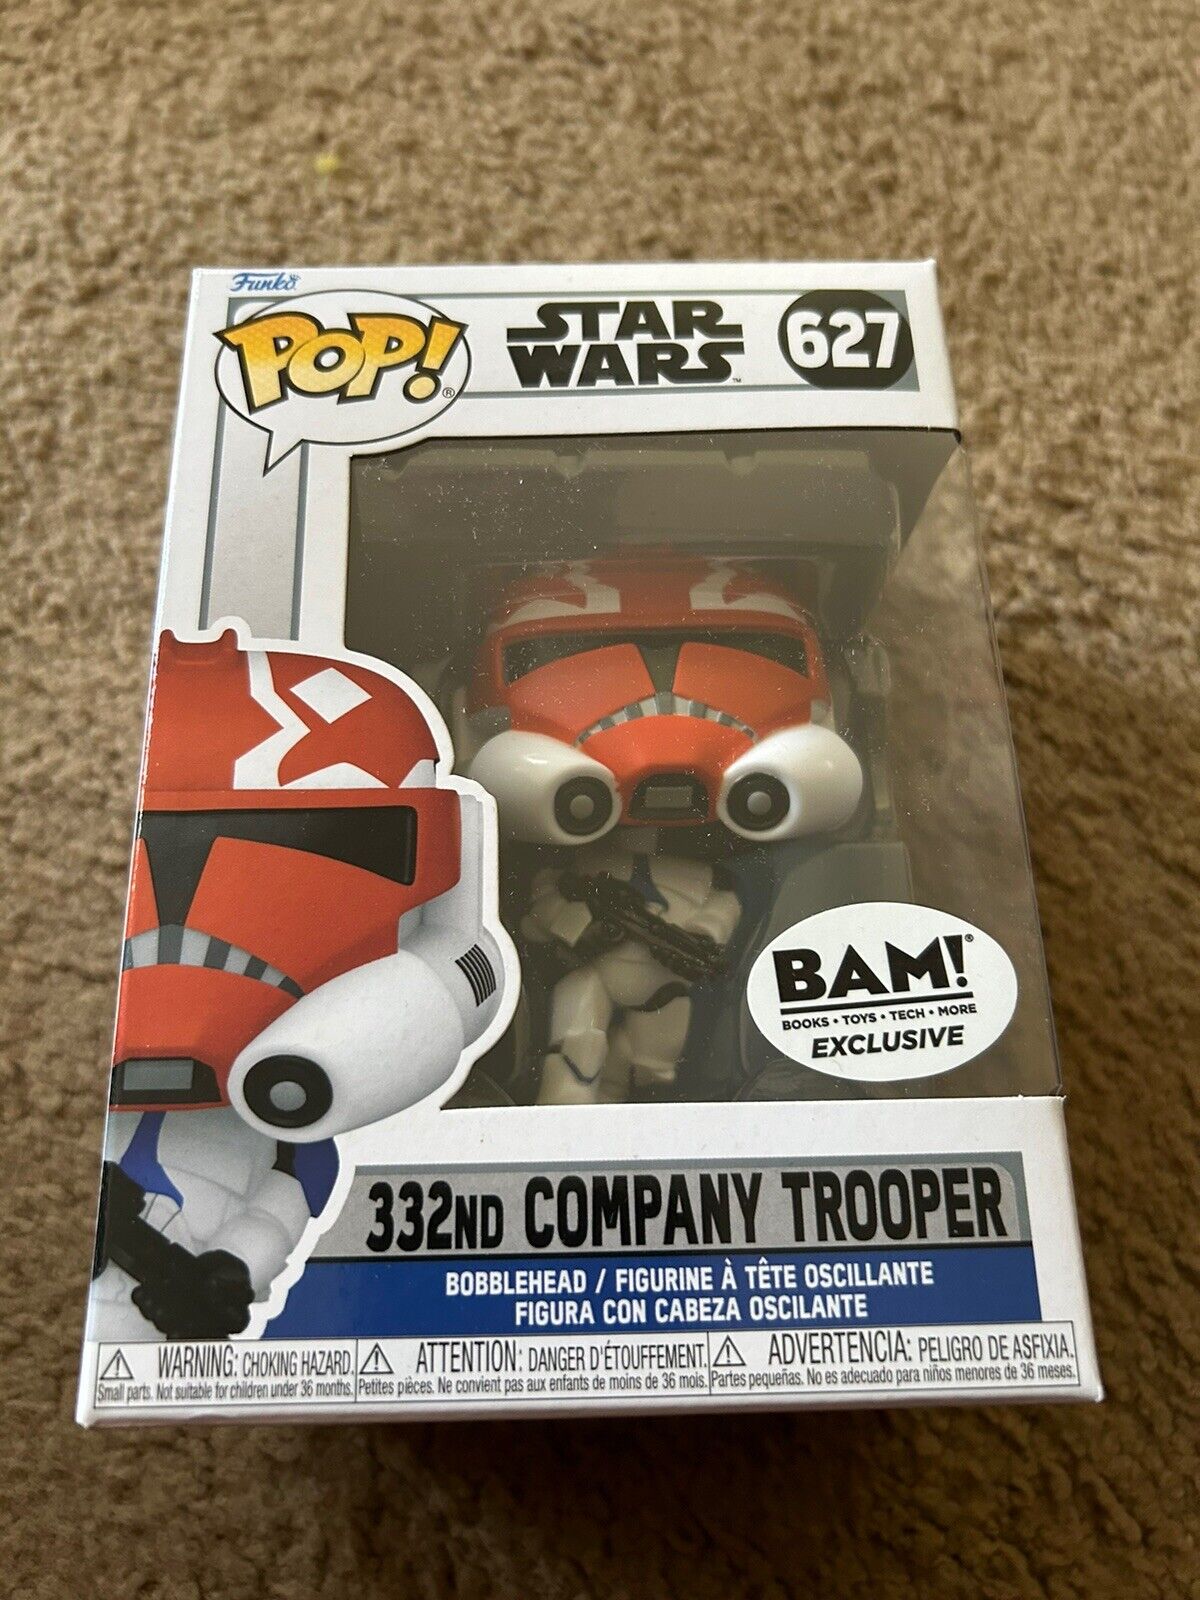 332ND COMPANY TROOPER FUNKO POP 627 BAM EXCLUSIVE STAR WARS BOX DAMAGE UNOPENED